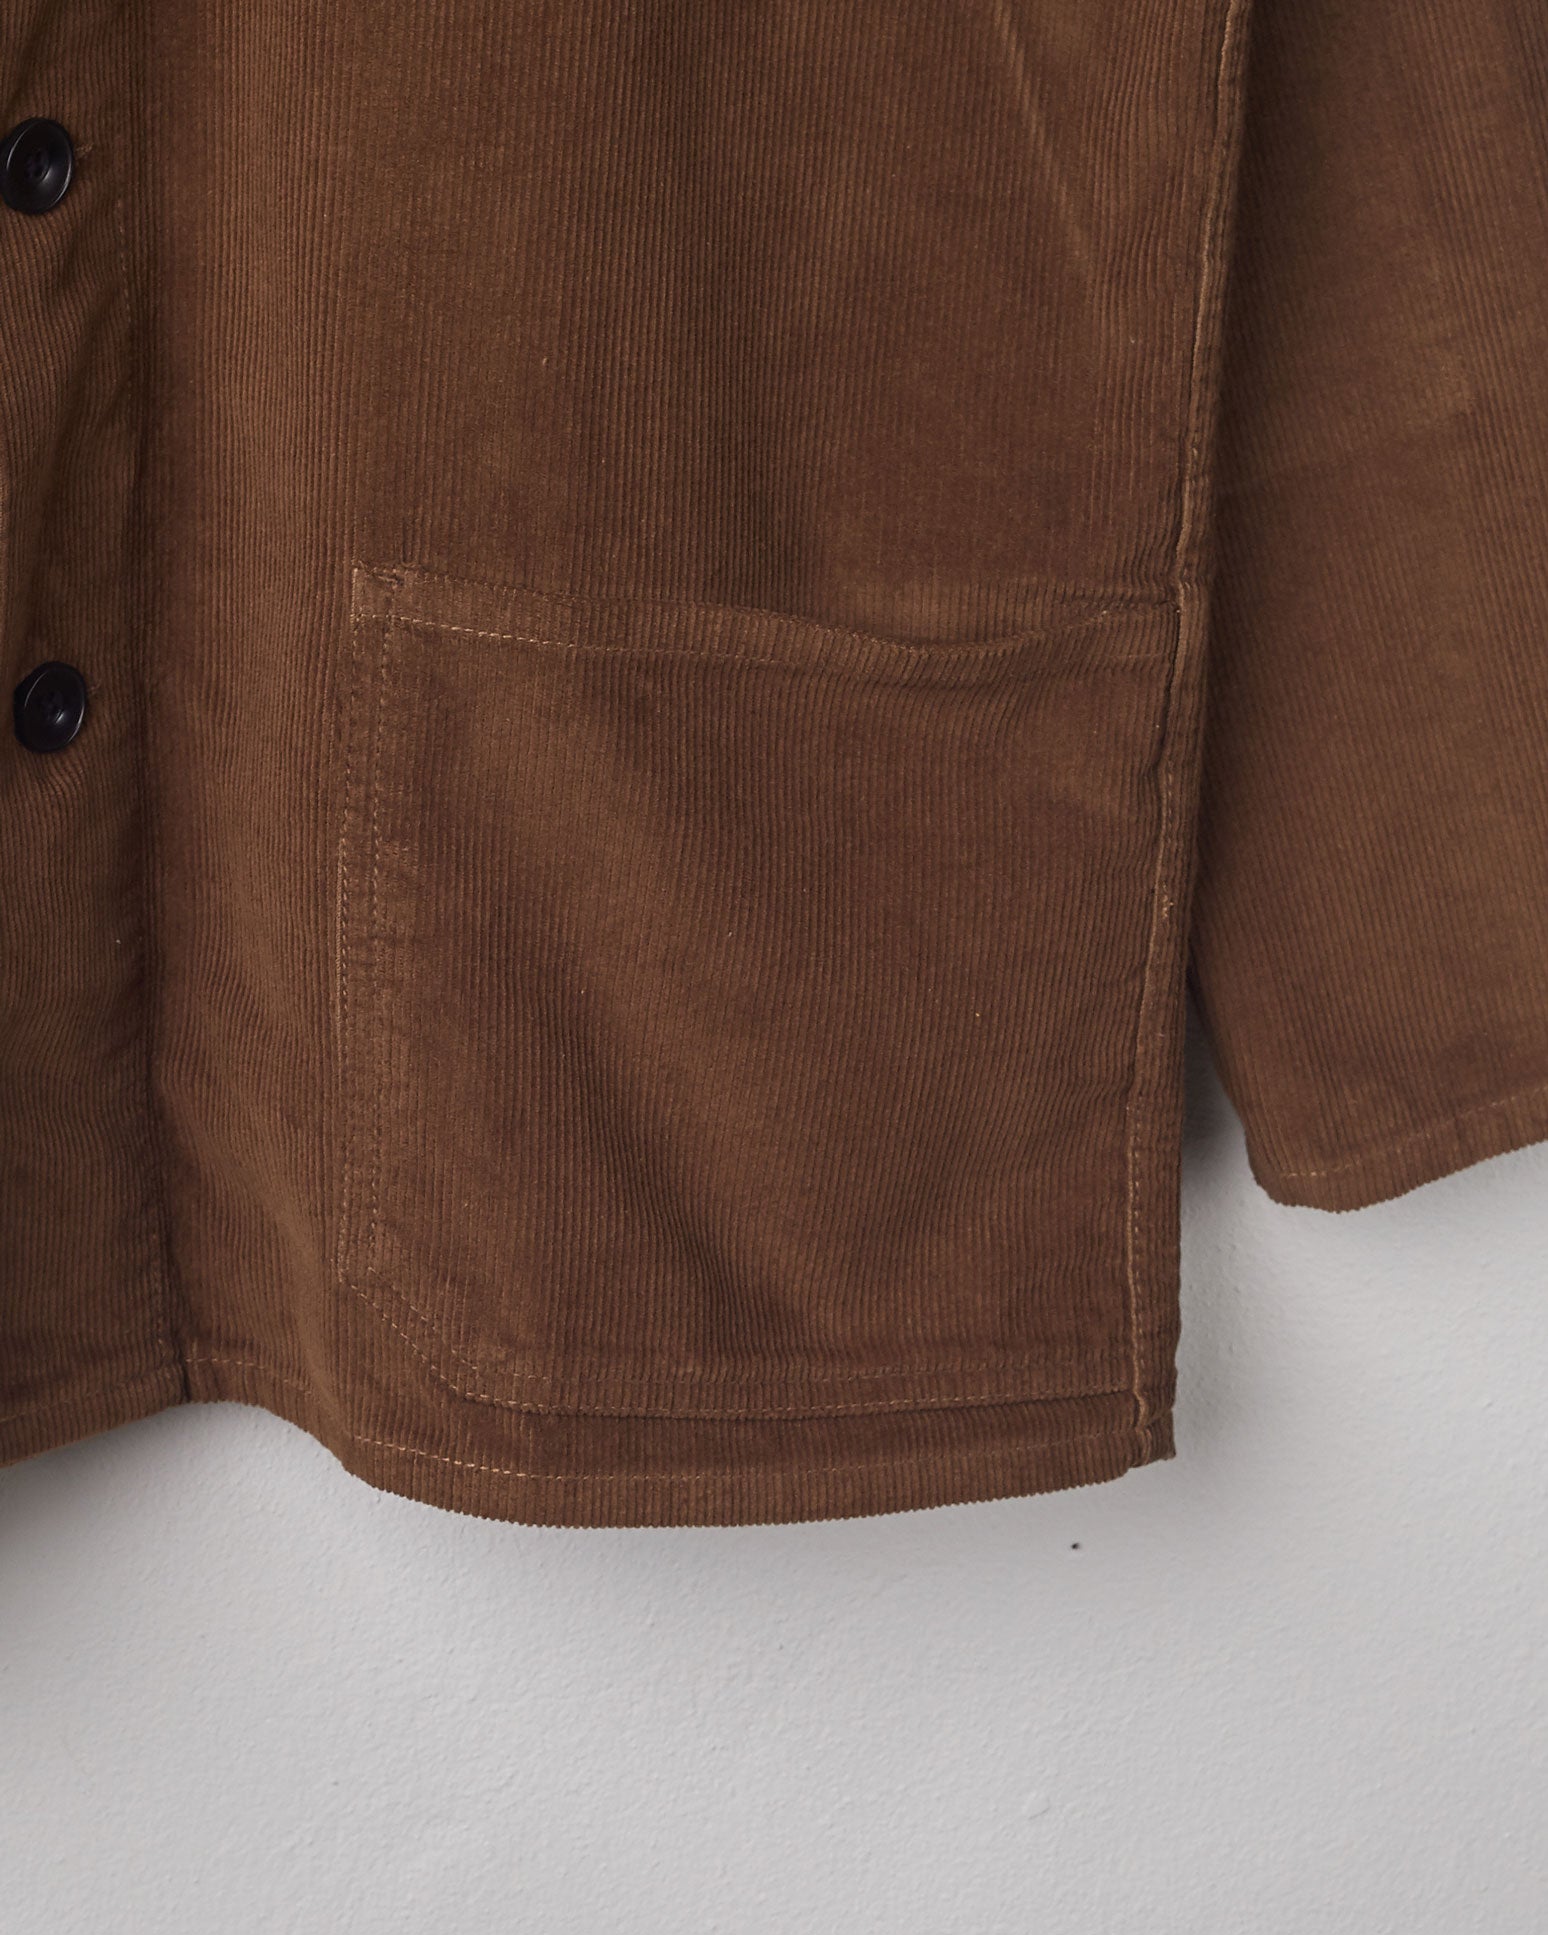 Close-up, bottom-left view of brown-coloured corduroy overshirt from Uskees with clear view of left hip pocket and sleeve.